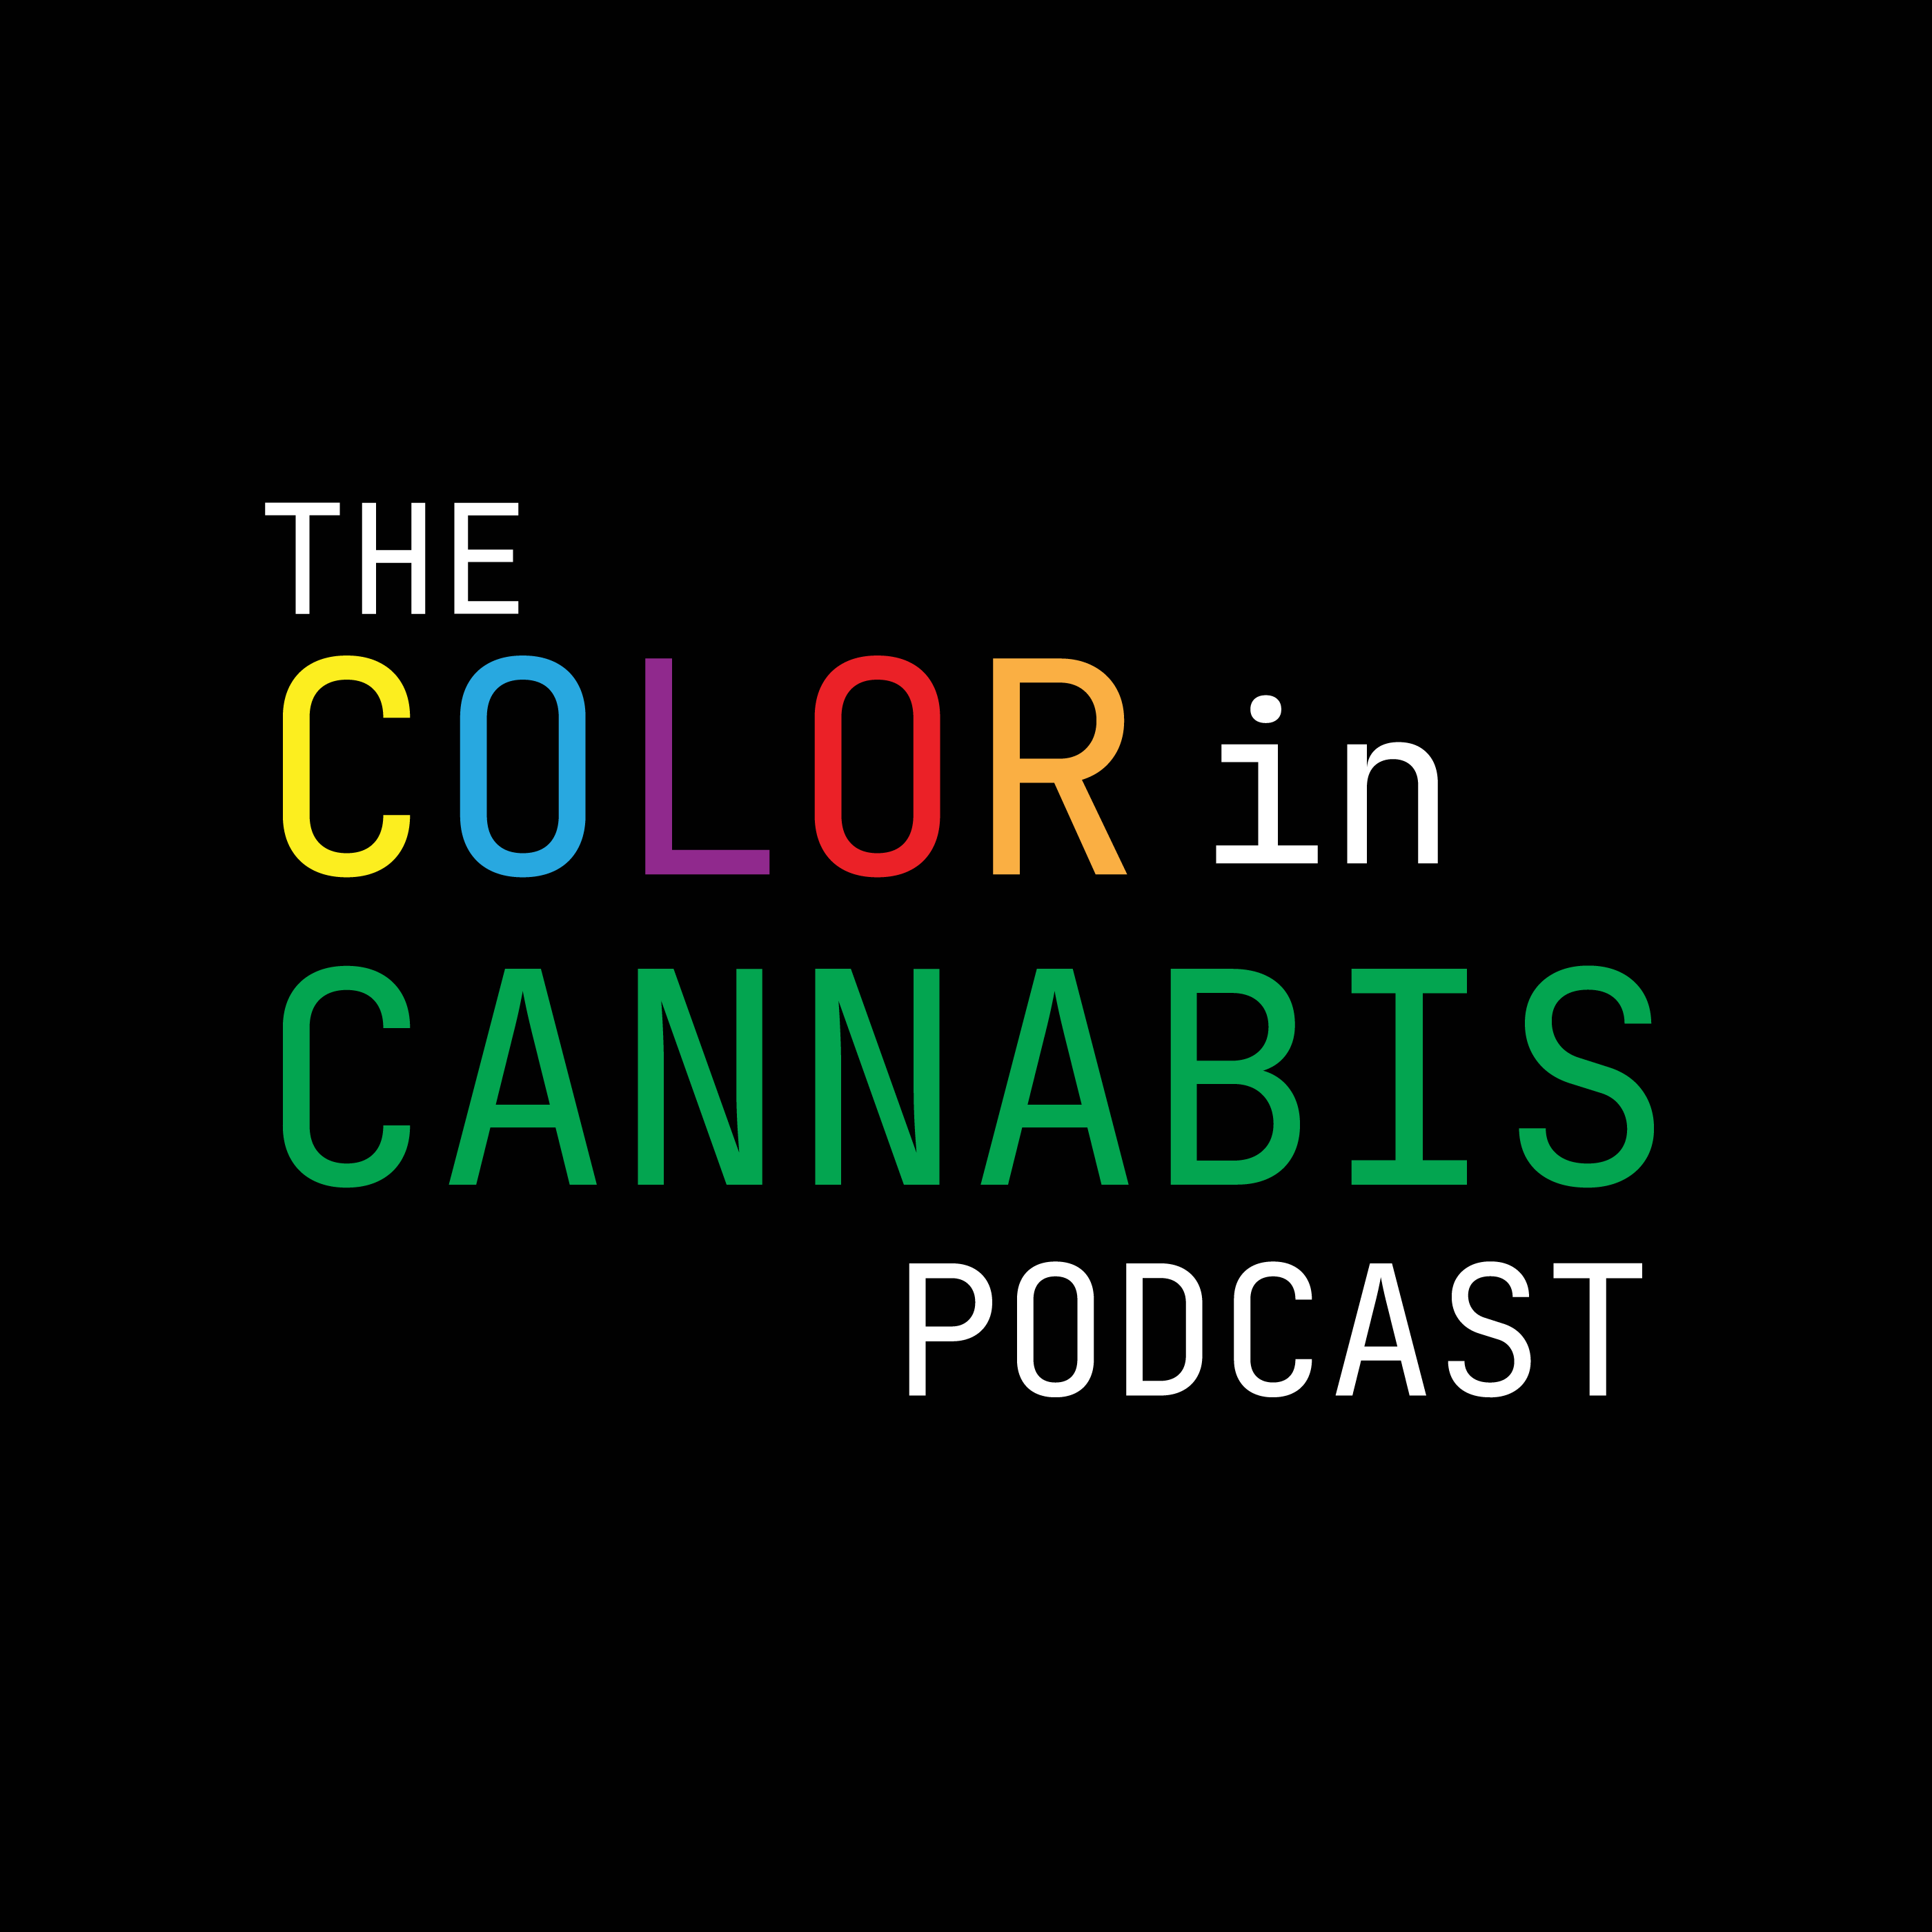 The Color in Cannabis Podcast